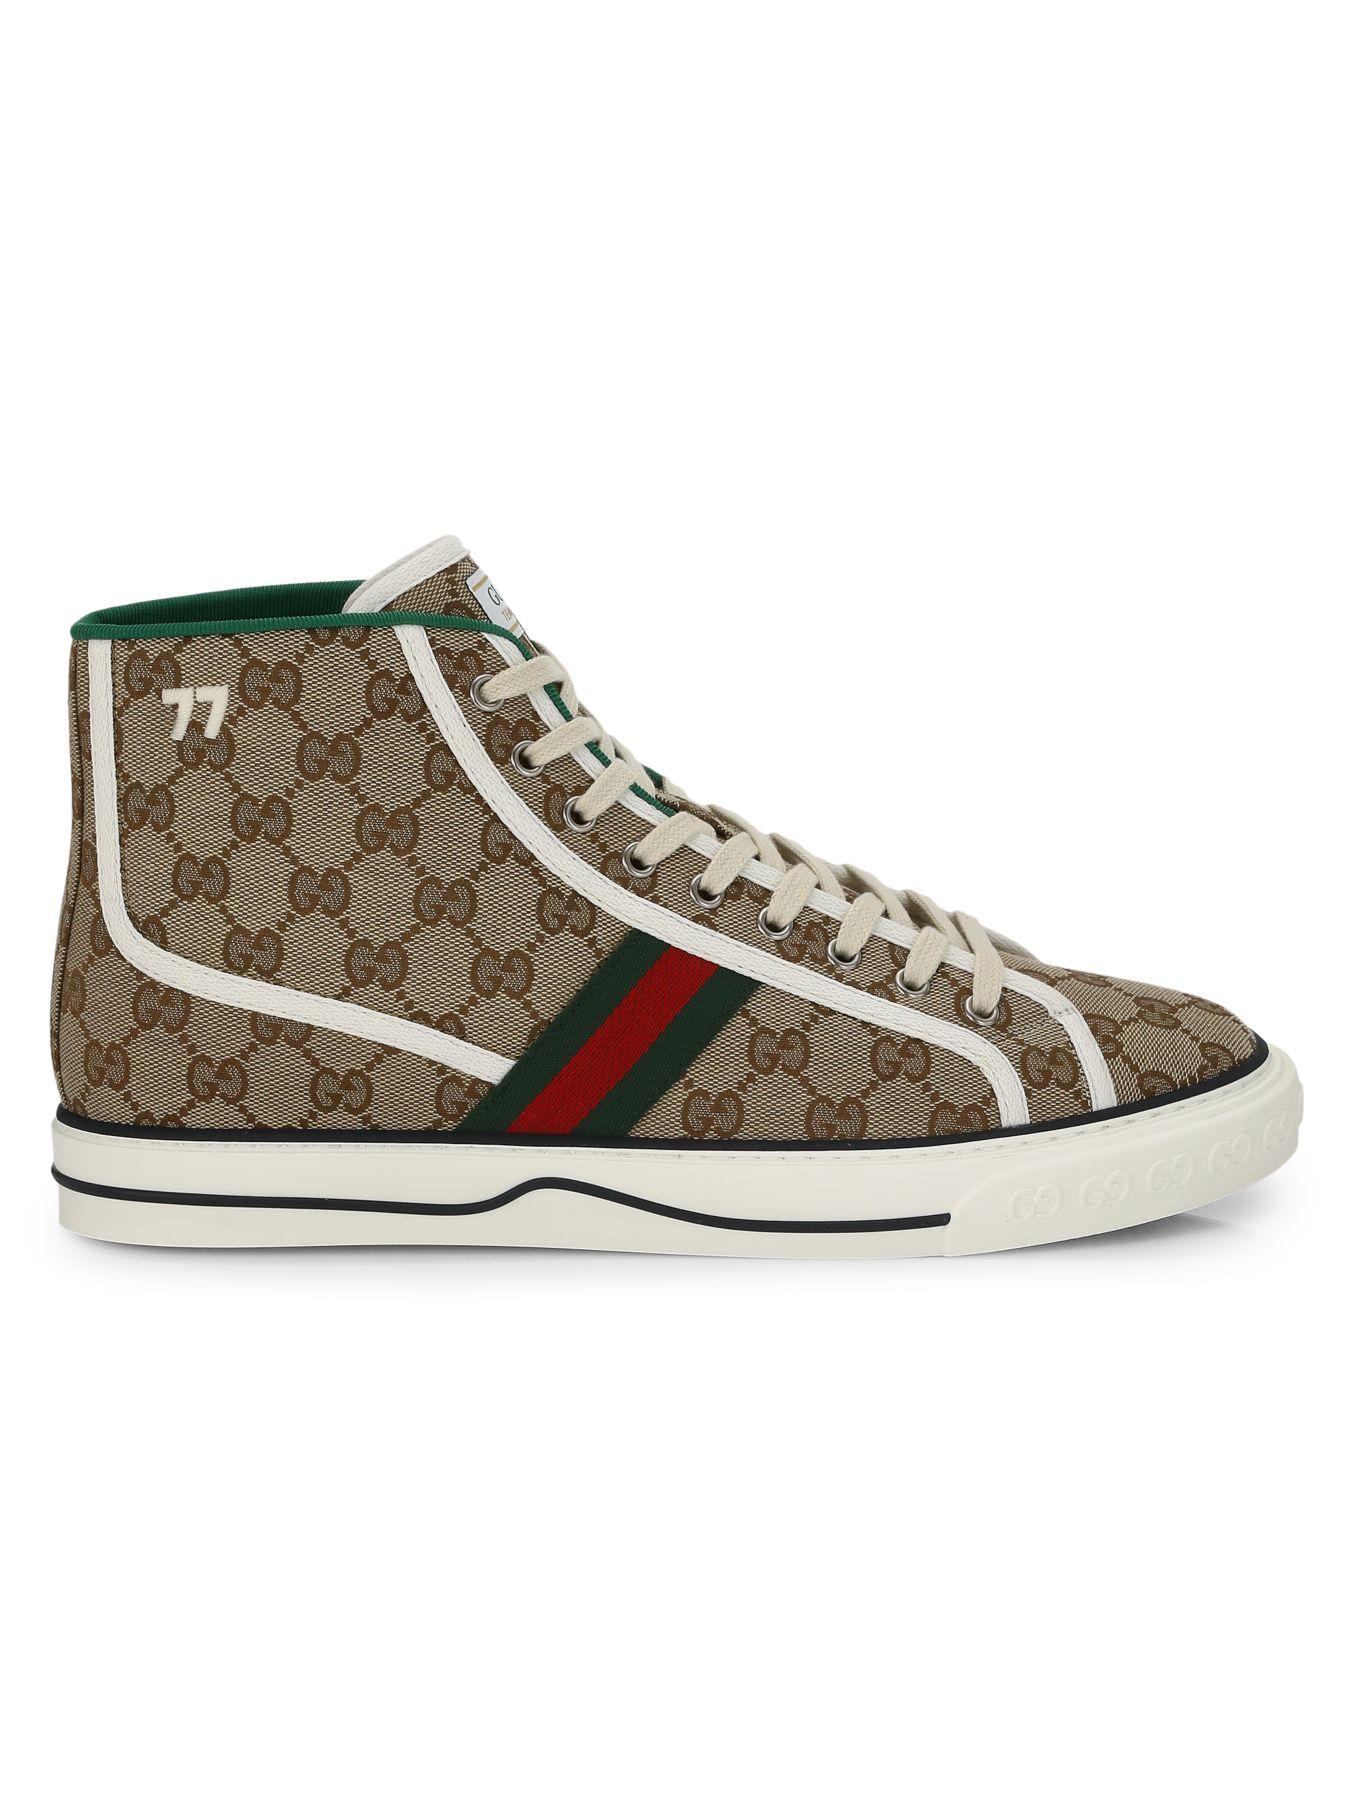 Gucci Canvas Tennis 1977 High-top Sneakers in Beige (Natural) for Men ...